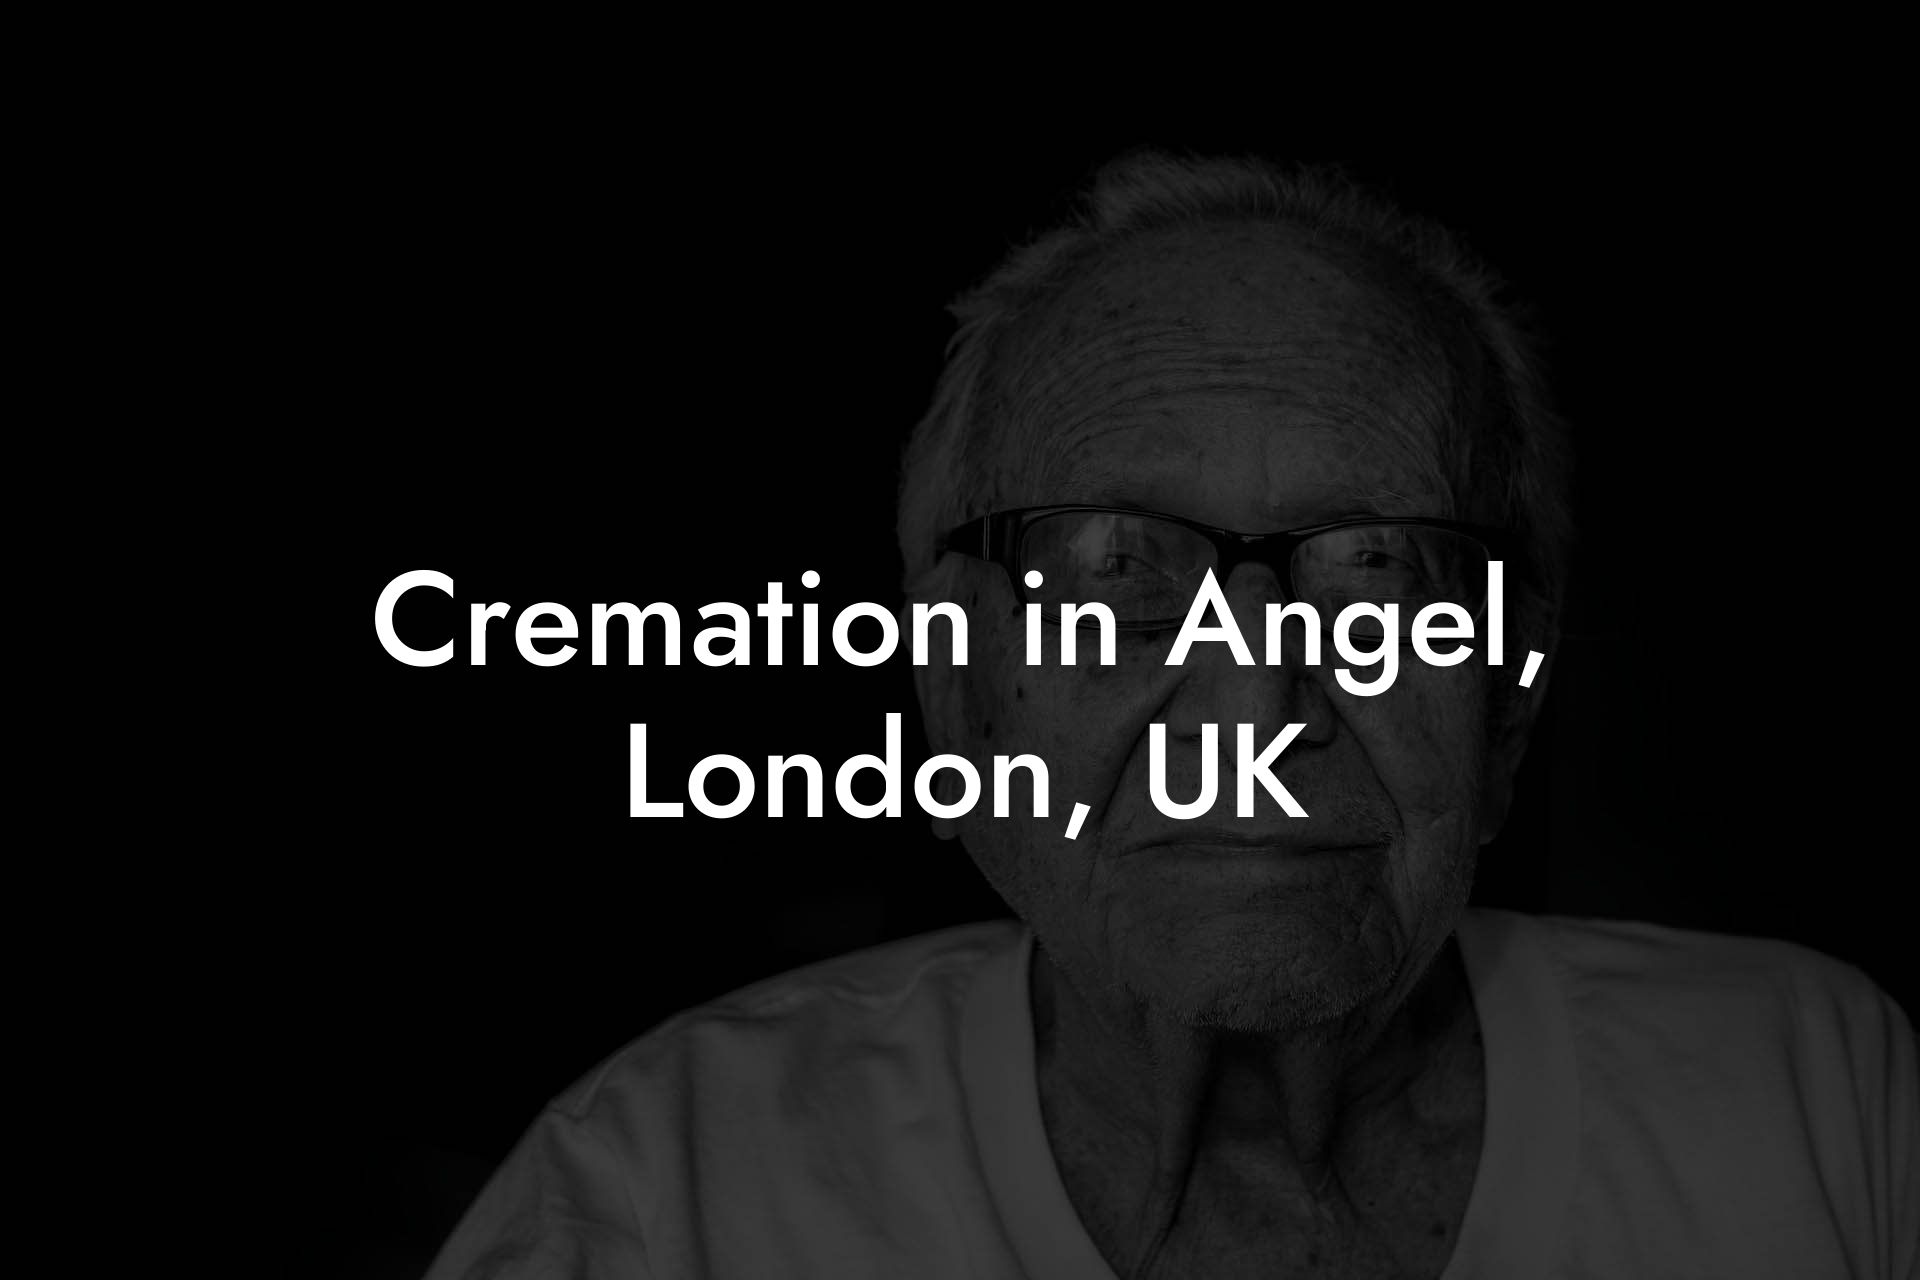 Cremation in Angel, London, UK